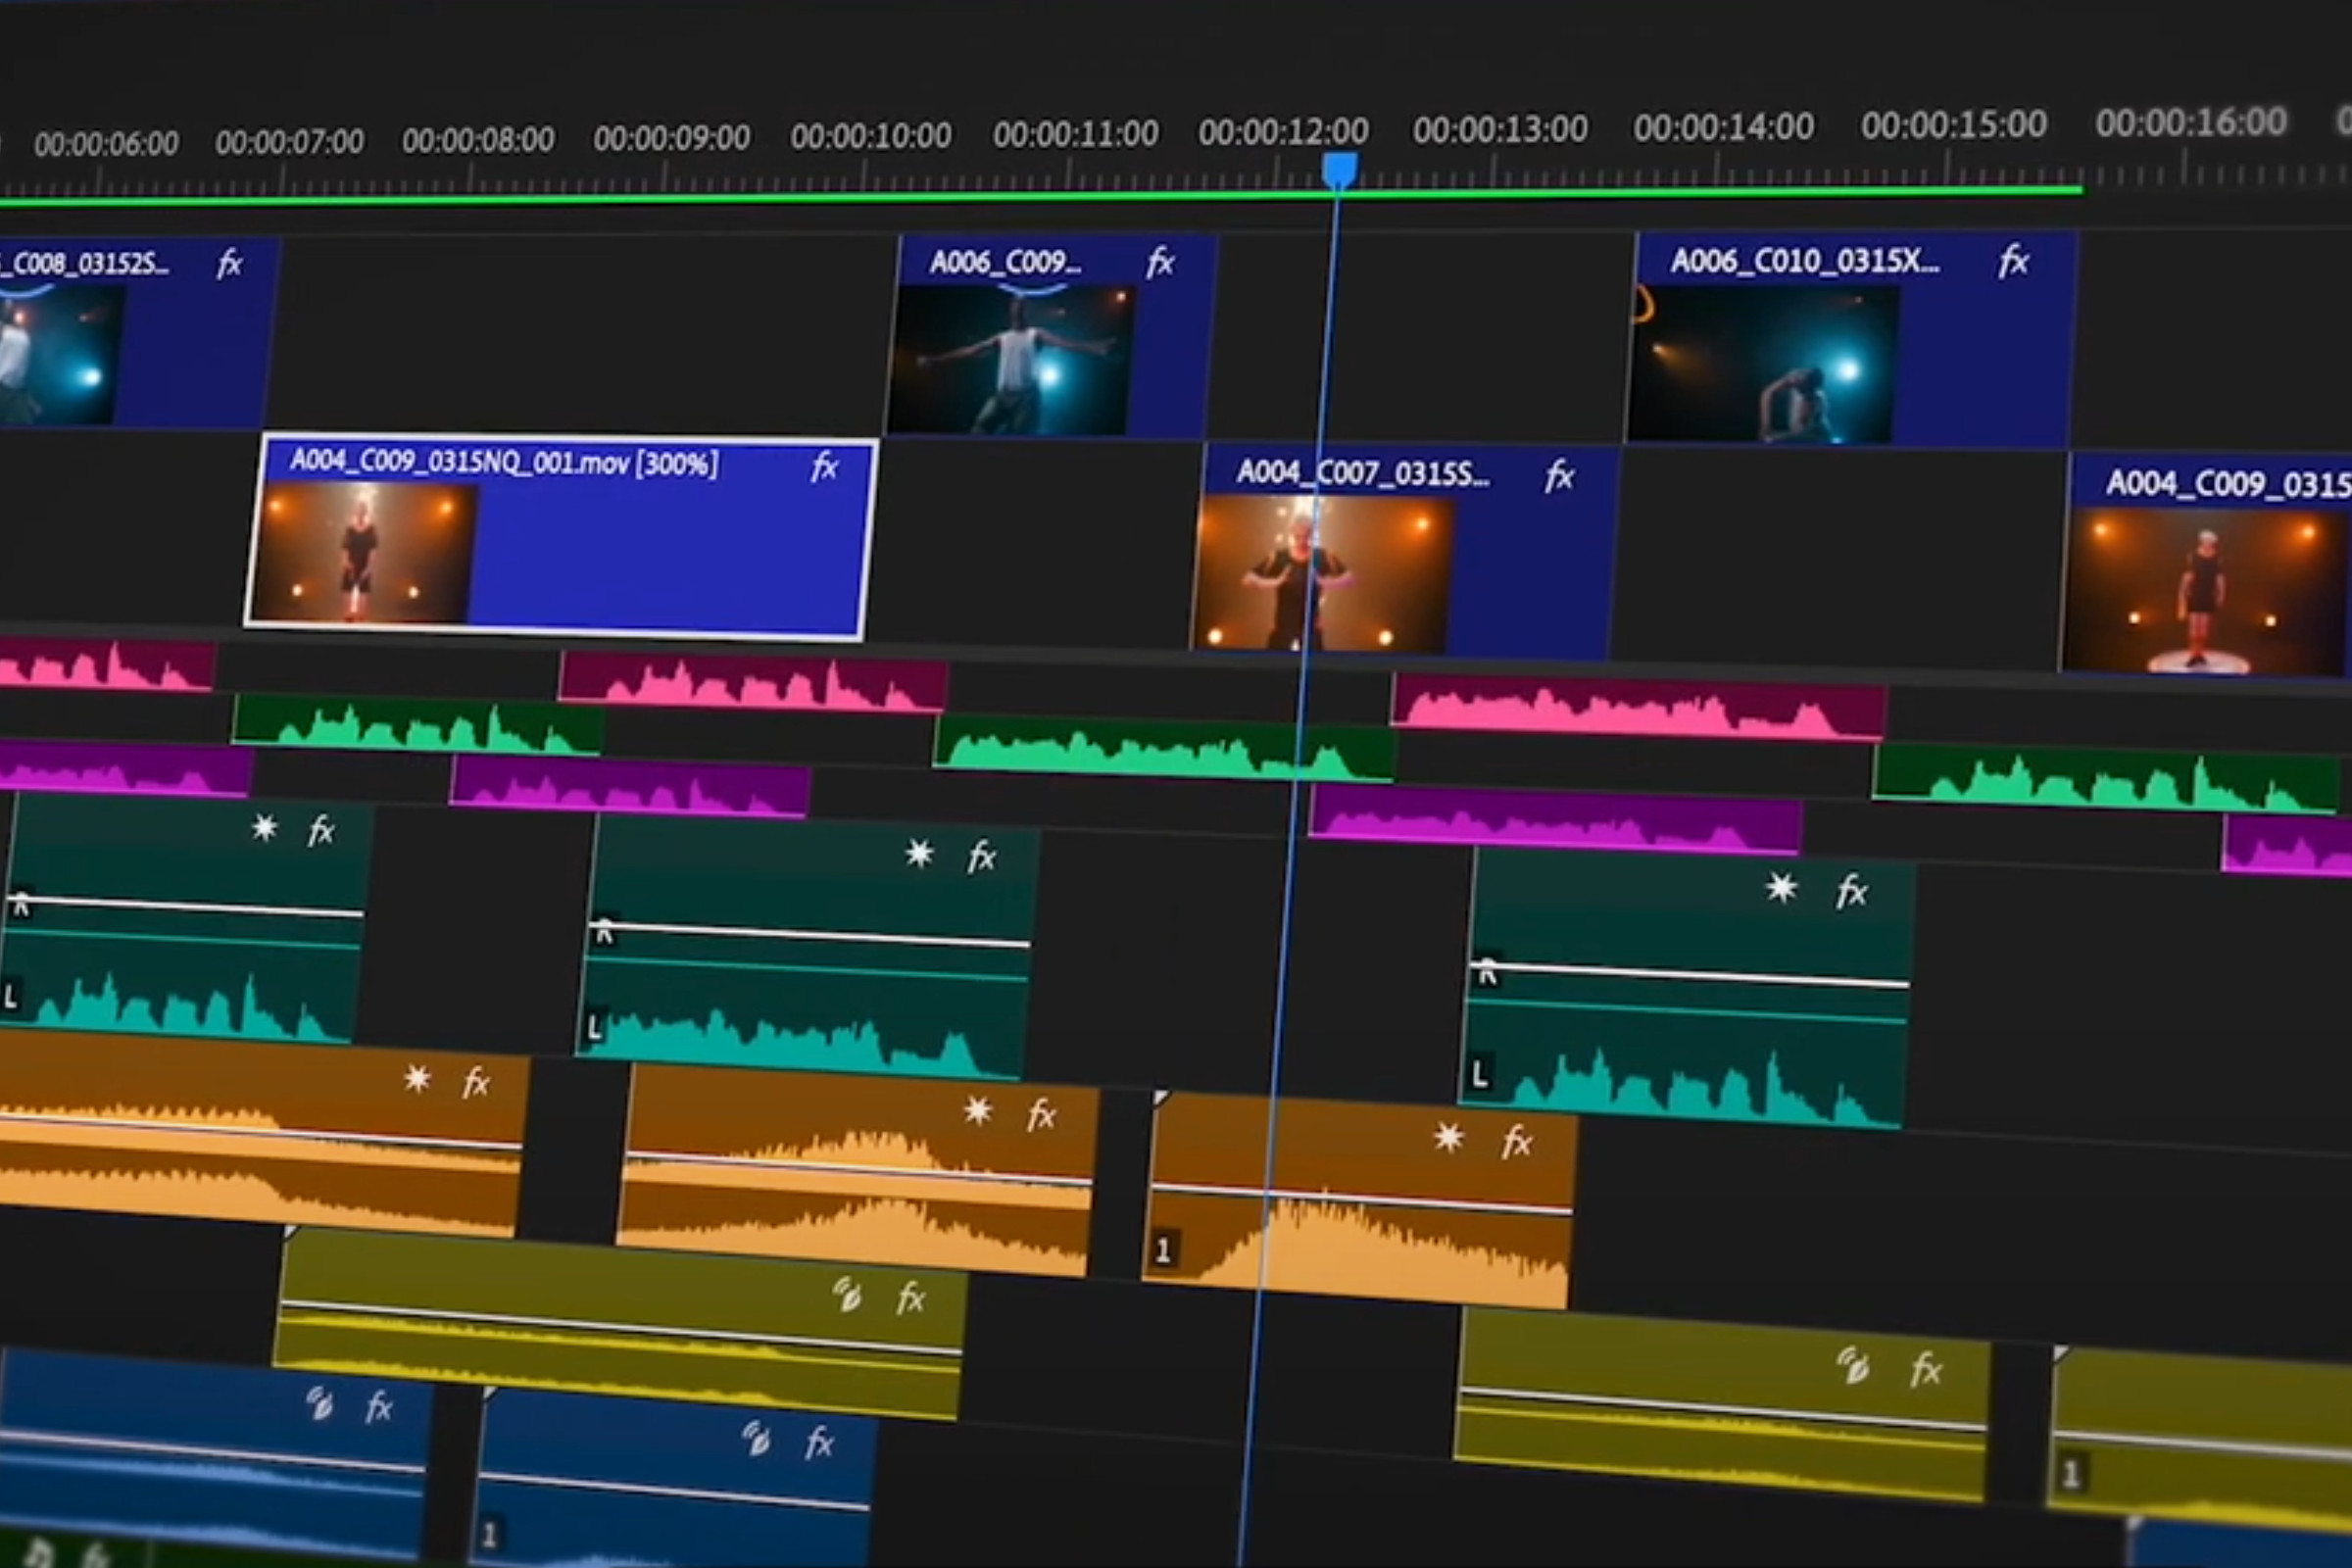 A screenshot taken of the Adobe Premiere Pro beta editing timeline with new track effects applied.